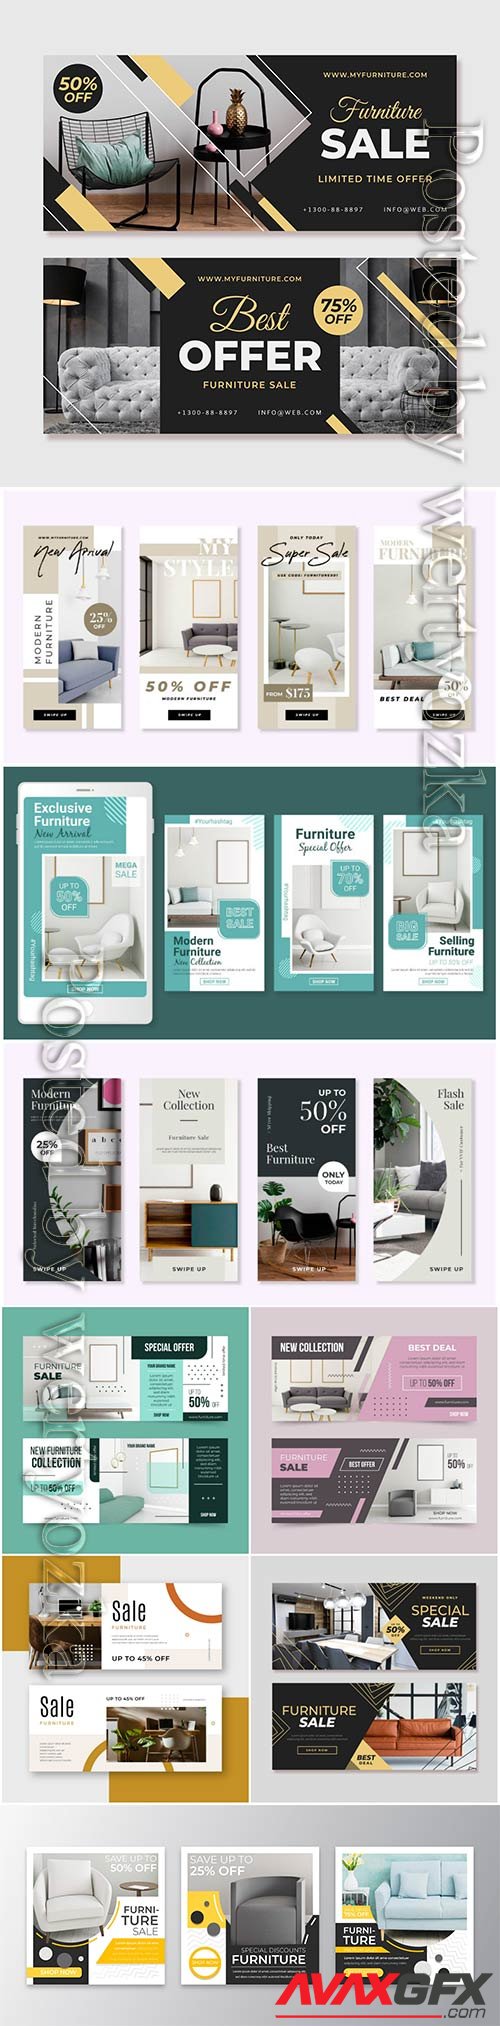 Furniture sale banners with discount